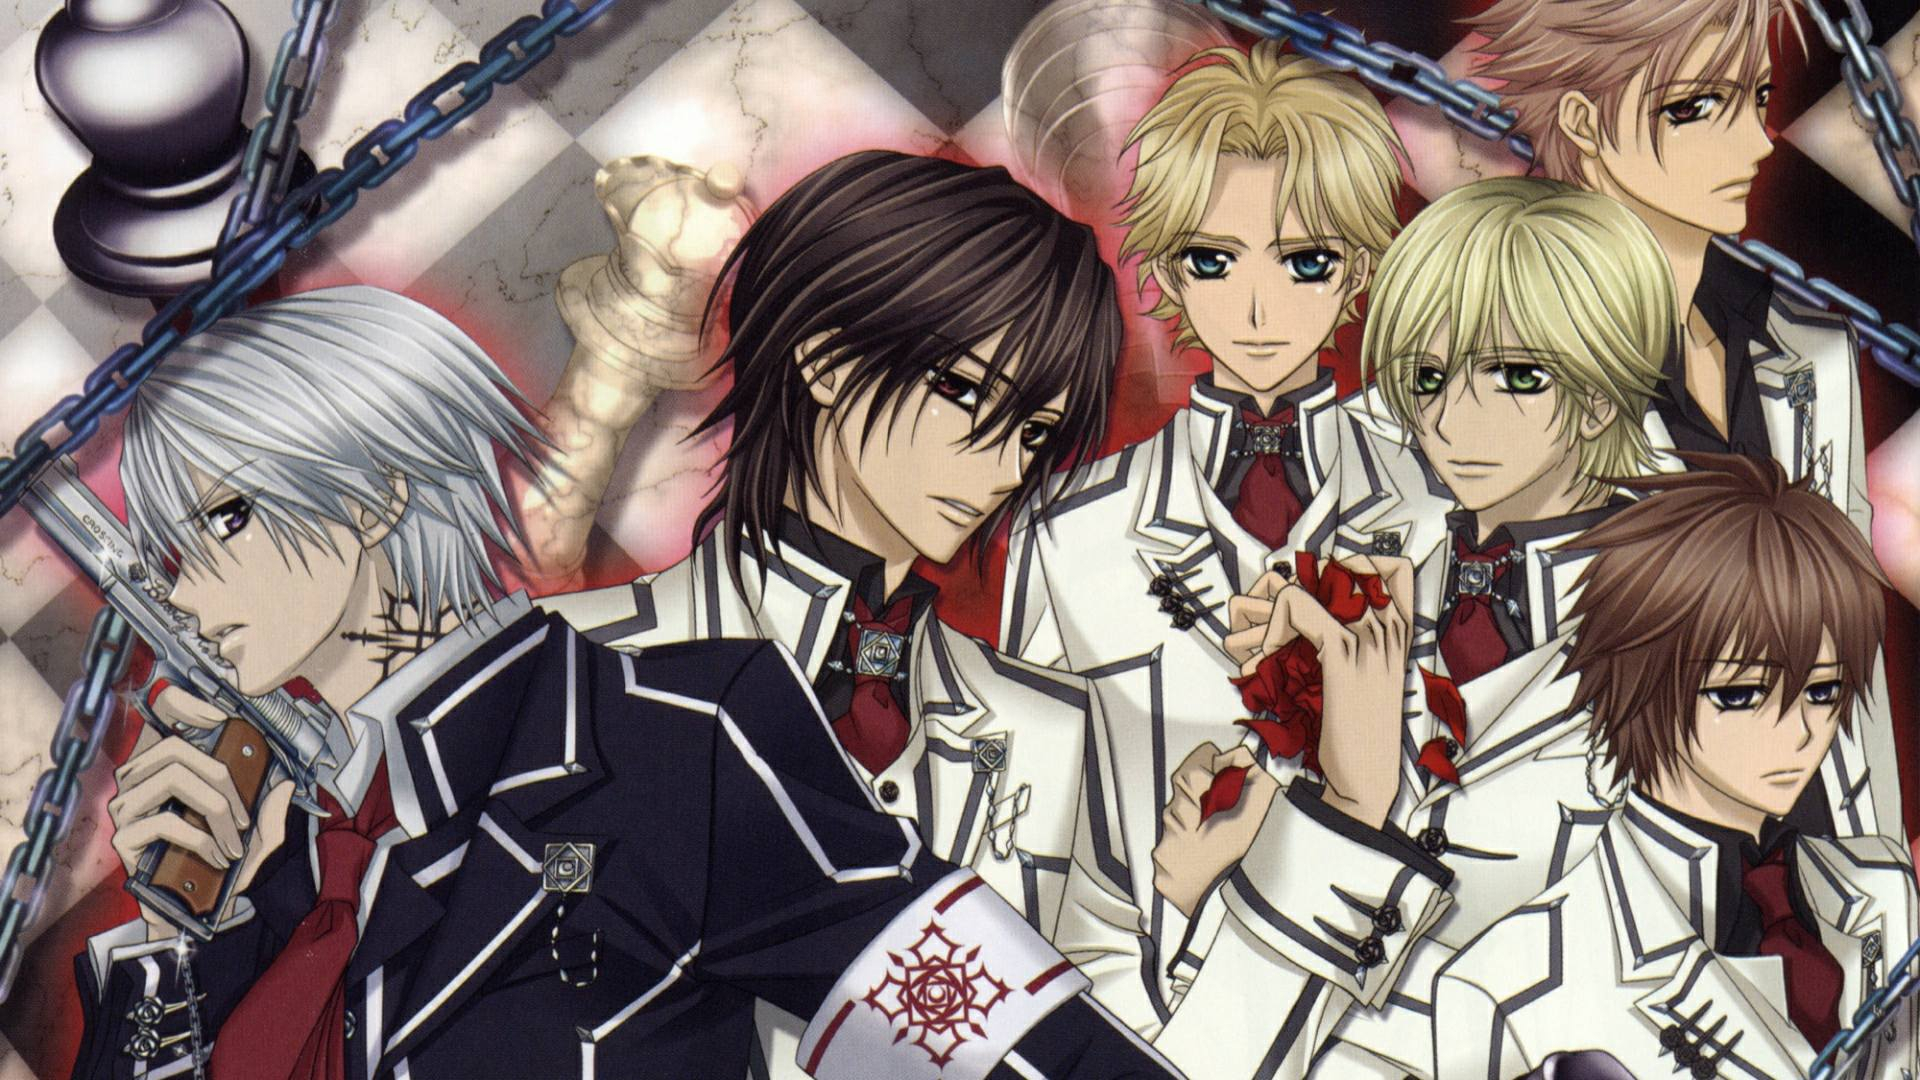 1920x1080 140+ Vampire Knight HD Wallpapers and Backgrounds